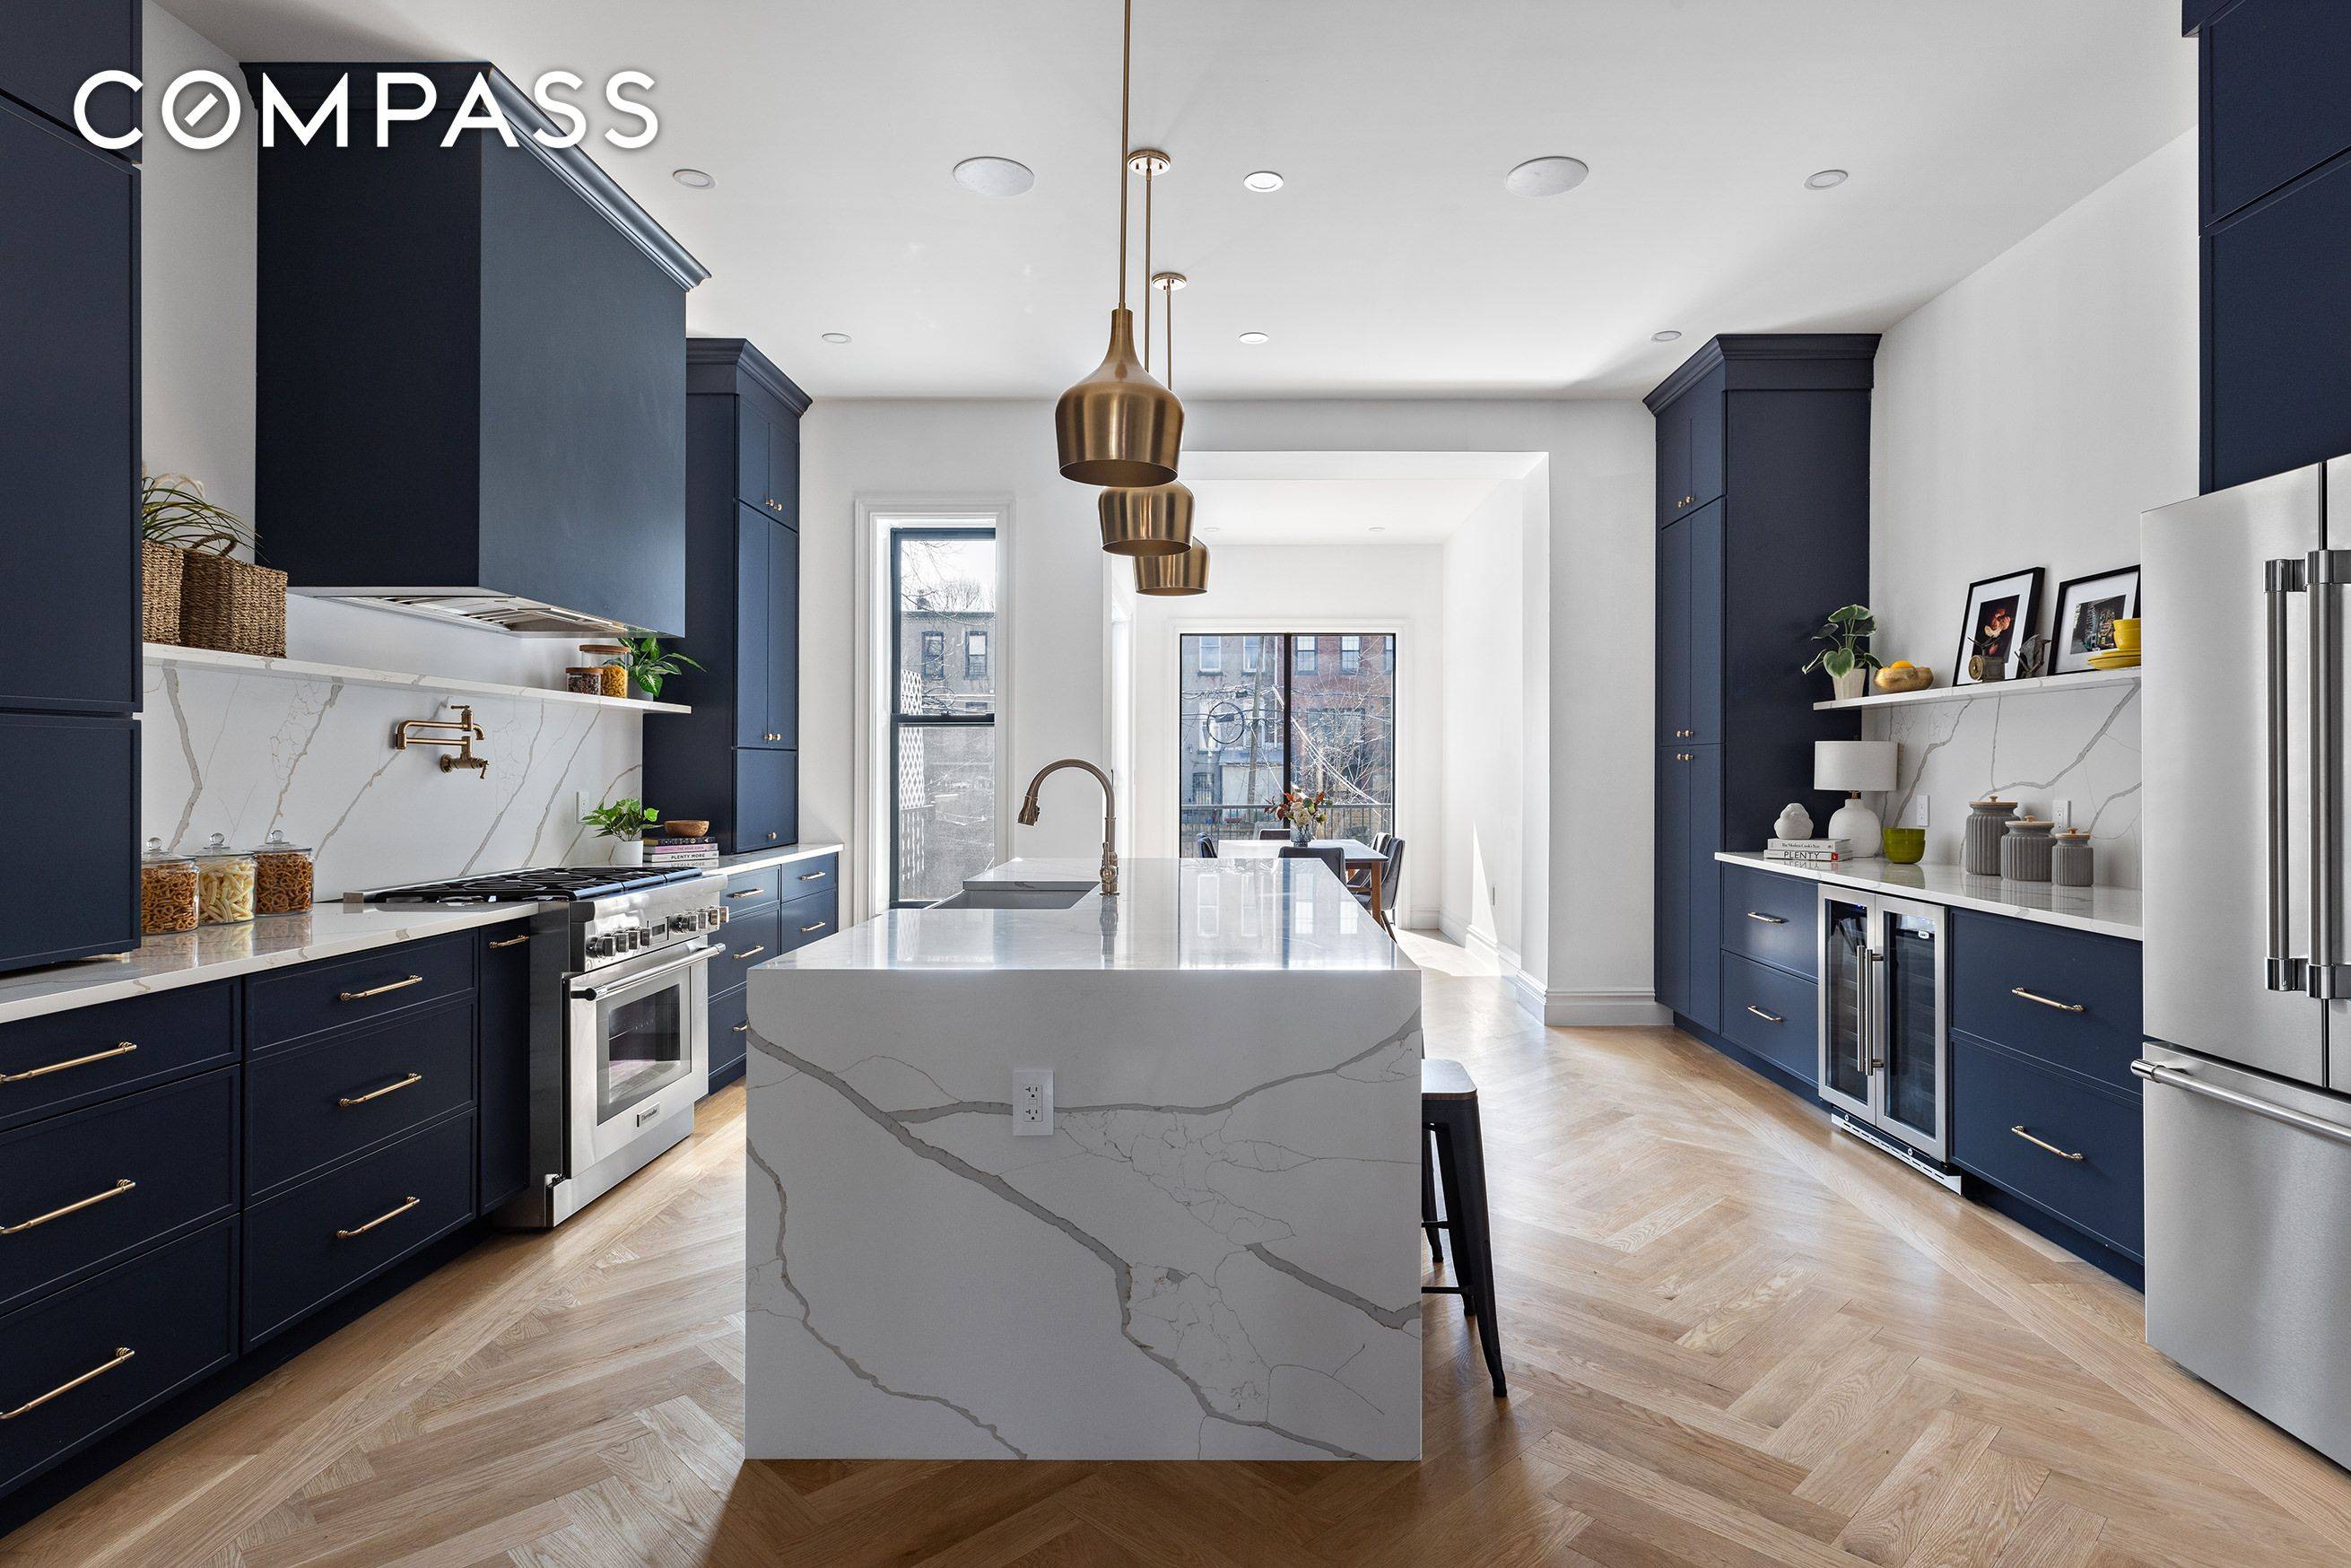 678 Park Place was originally constructed in 1901, this newly renovated home is the perfect combination of high end finishes, modern technology, and impeccable details, an honorable salute to its ...